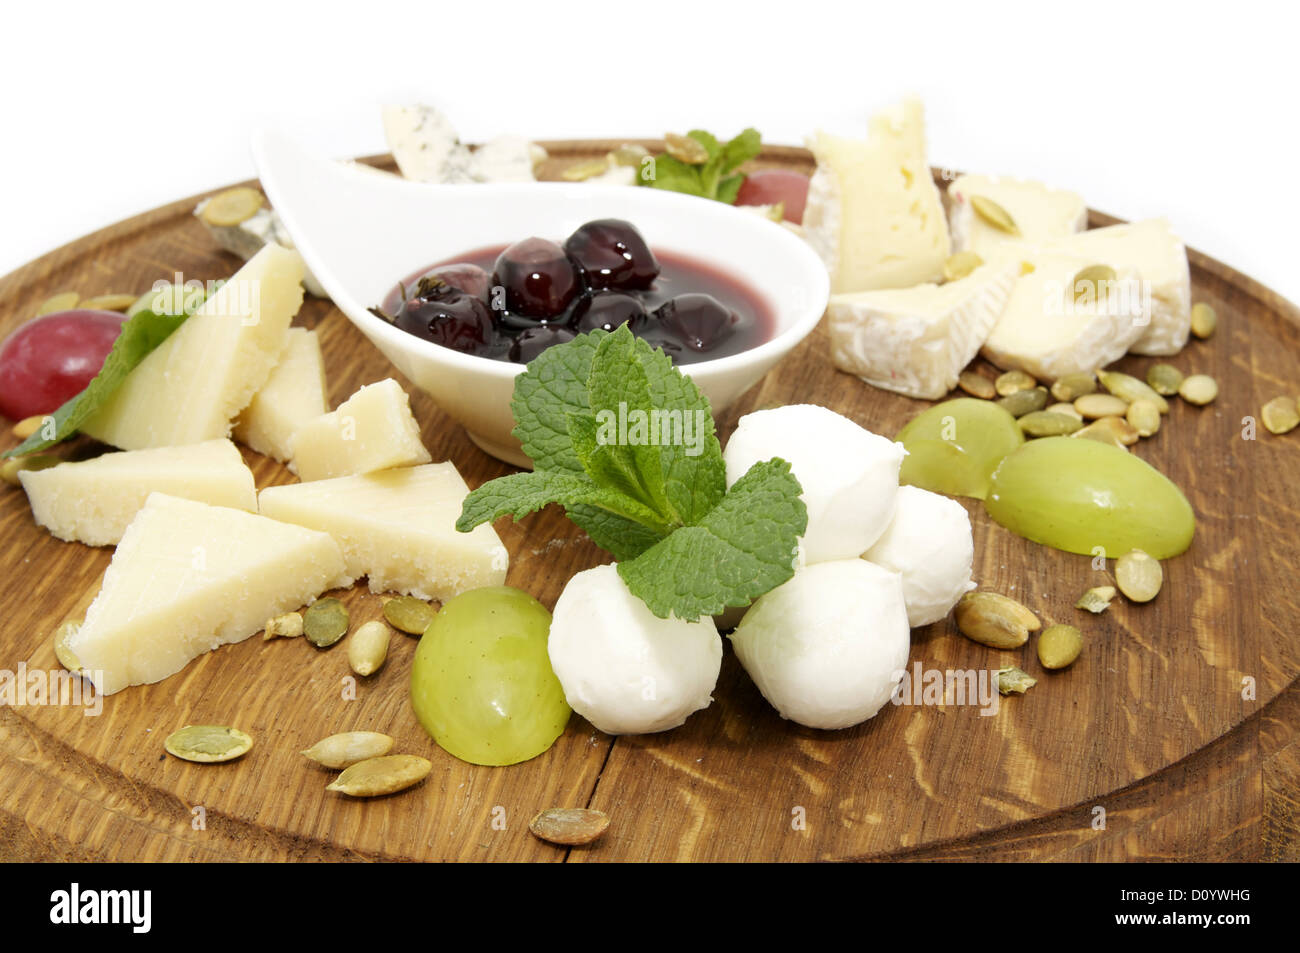 a plate of cheese Stock Photo